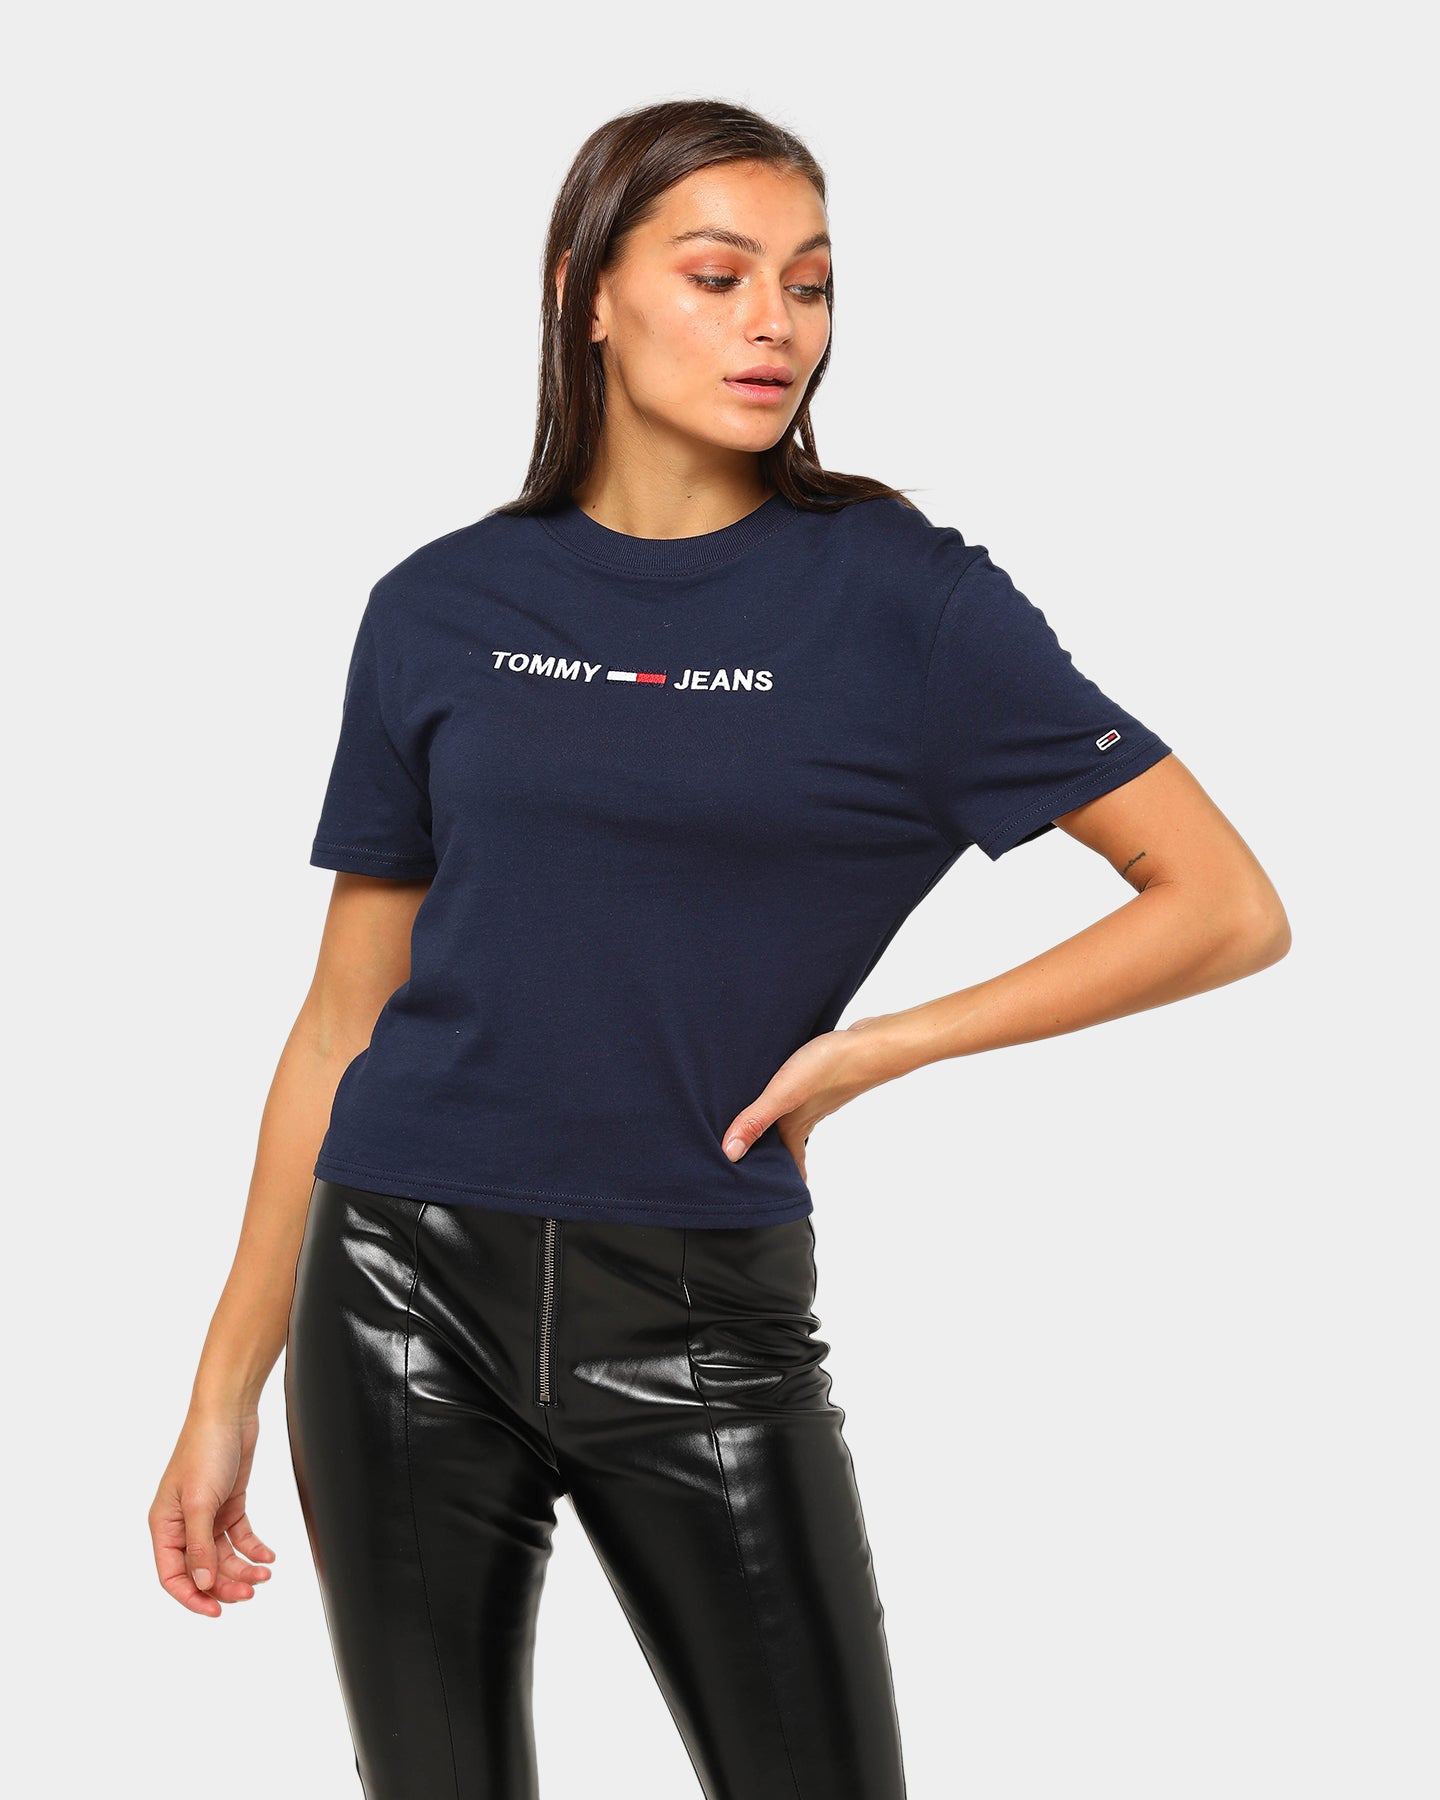 tommy jeans logo t shirt